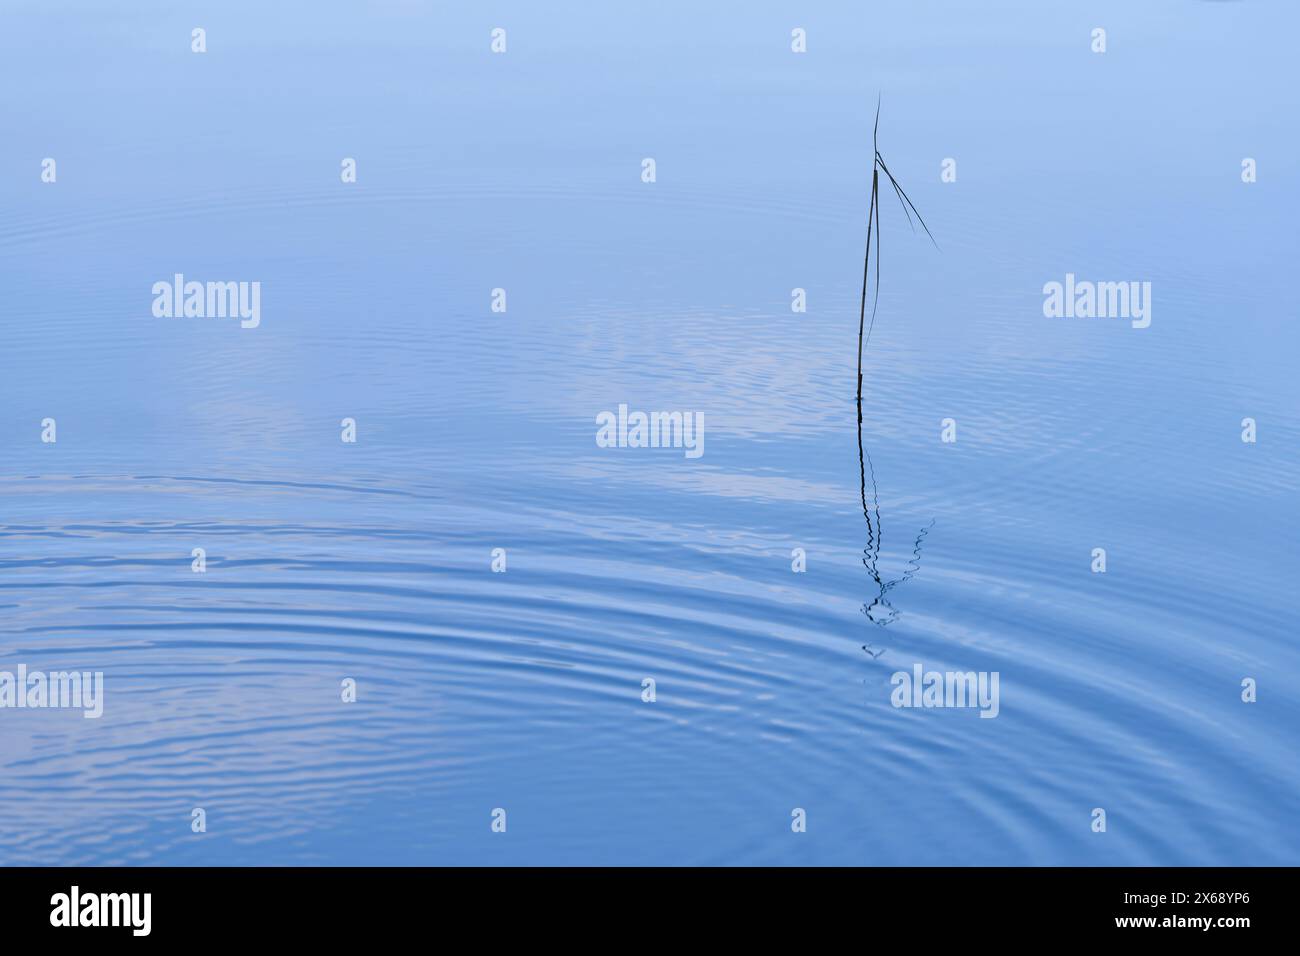 Falling drops of water form circles on the surface of a lake, a blade of reed grass is reflected in the water, Germany Stock Photo